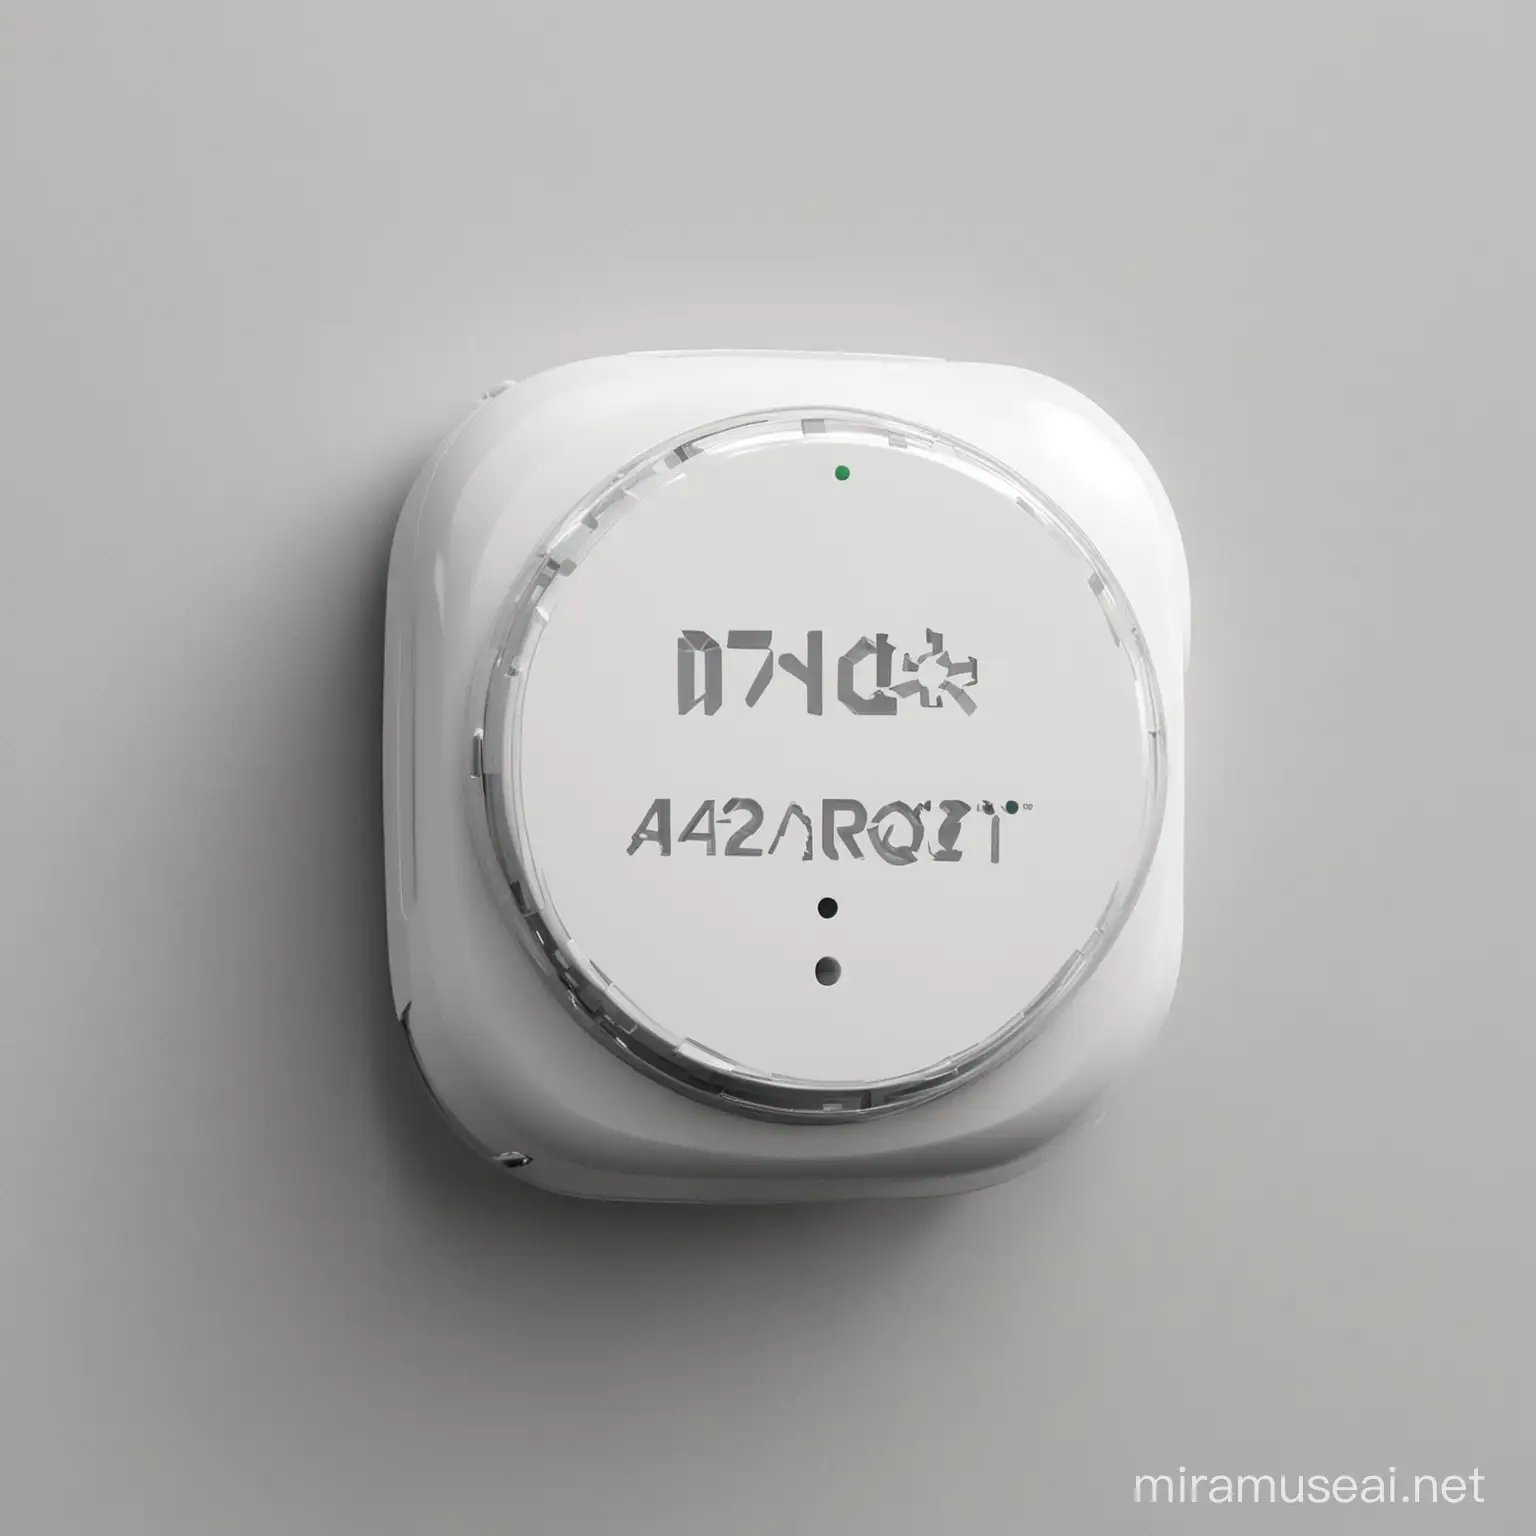 Compact Smart Home Monitoring Gadget Temperature Control Device Detection